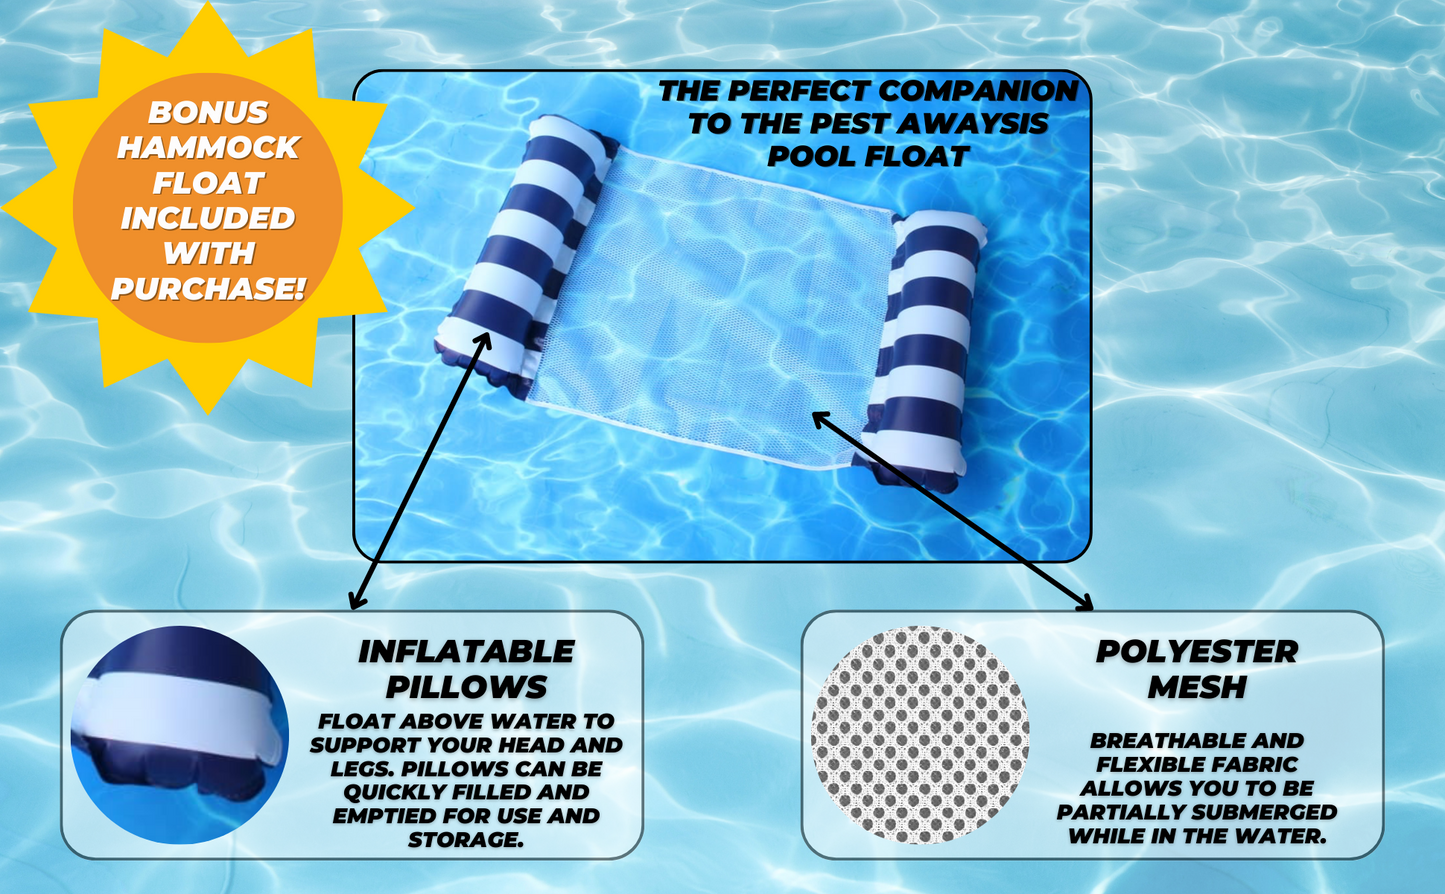 Pest Awaysis included a bonus hammock float with purchase, made with polyester mesh and blue and white striped inflatable pillows.